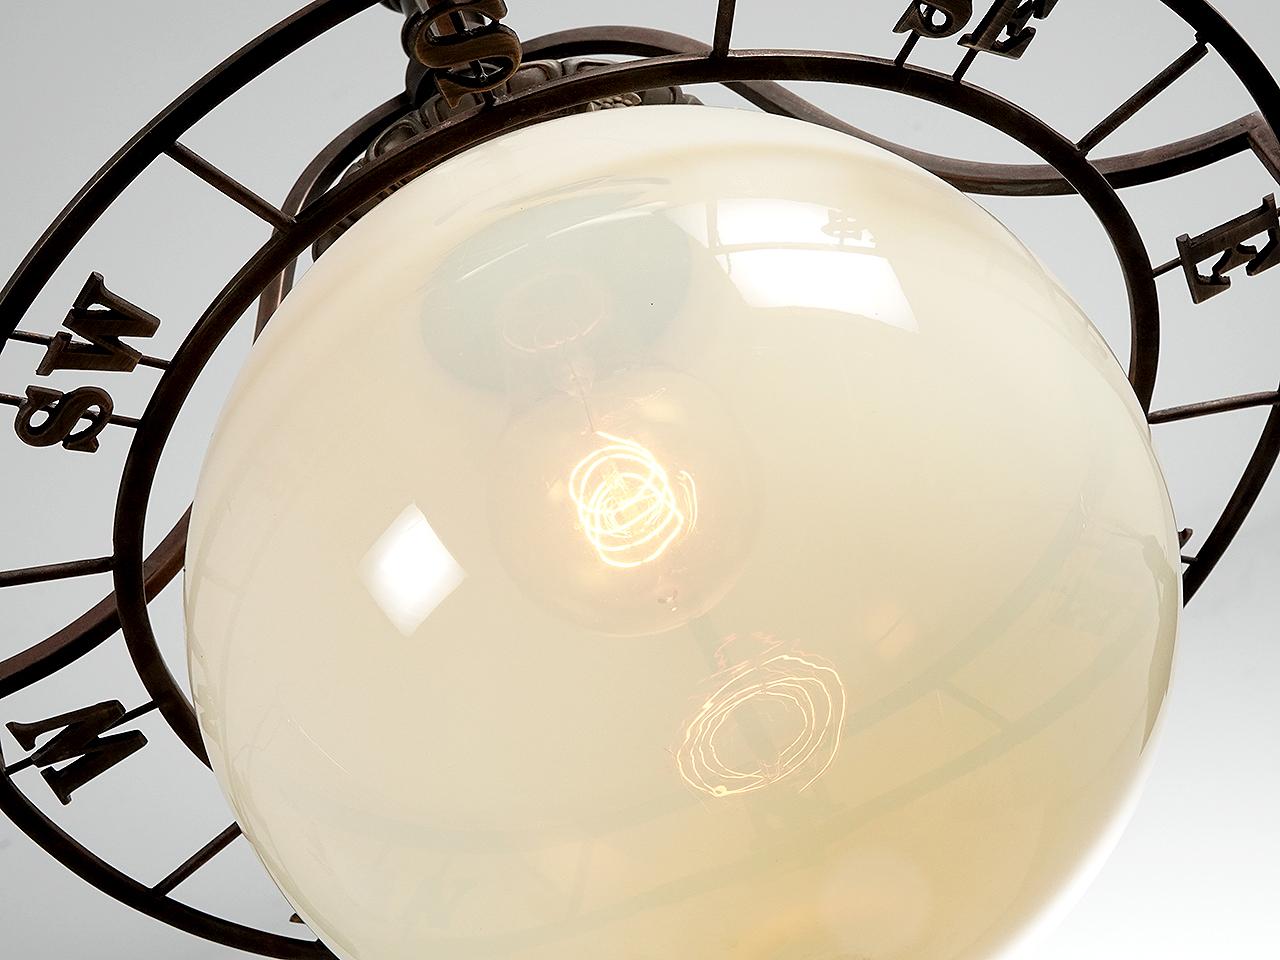 The center shade on this pendent is a translucent Vaseline Glass globe. Tight around the globe is a compass. Most of the other hardware have some nice decorative detail. The lamp looks early and my best guess is 1915 to 1920.